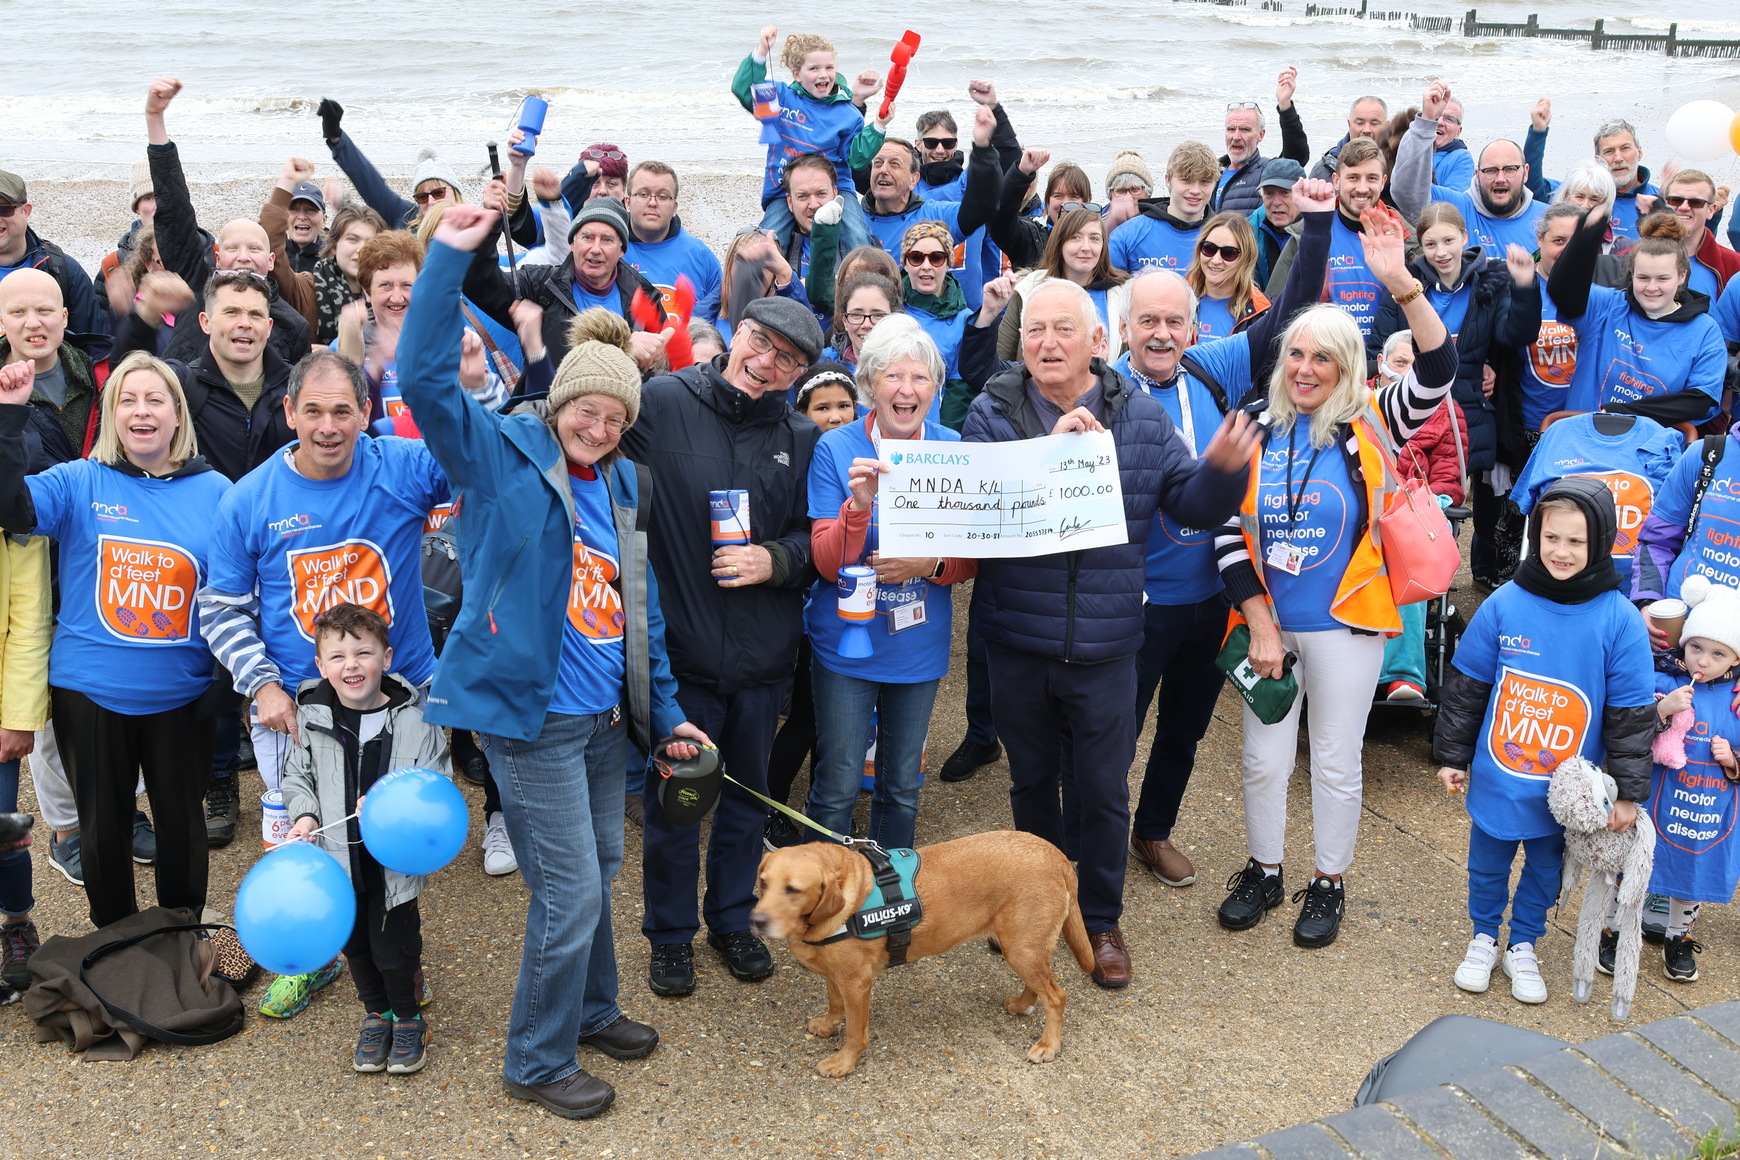 Photograph of the Kings Lynn Support Group on their annual Walk to d'Feet MND